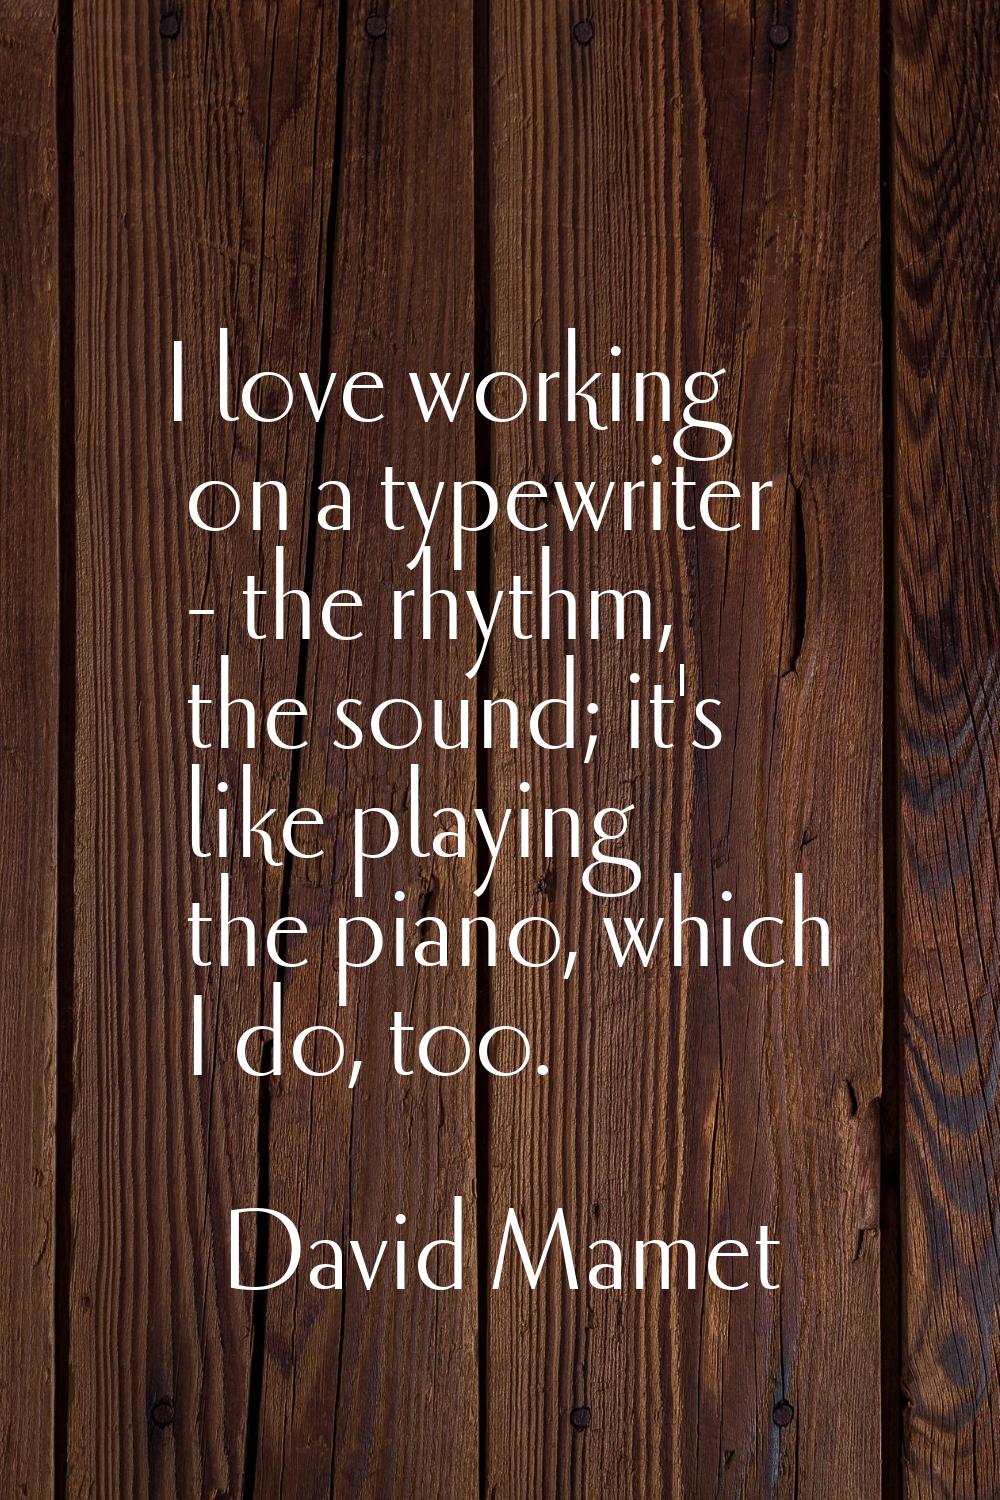 I love working on a typewriter - the rhythm, the sound; it's like playing the piano, which I do, to